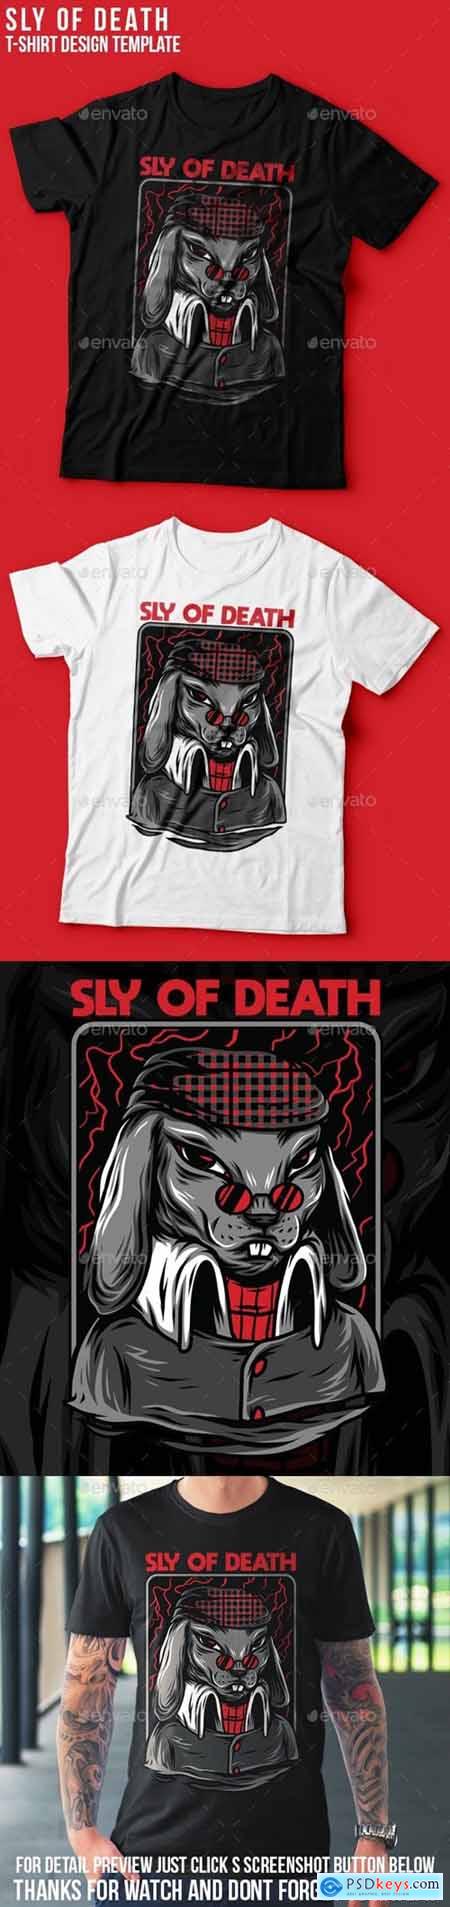 Graphicriver Sly of Death T-Shirt Design